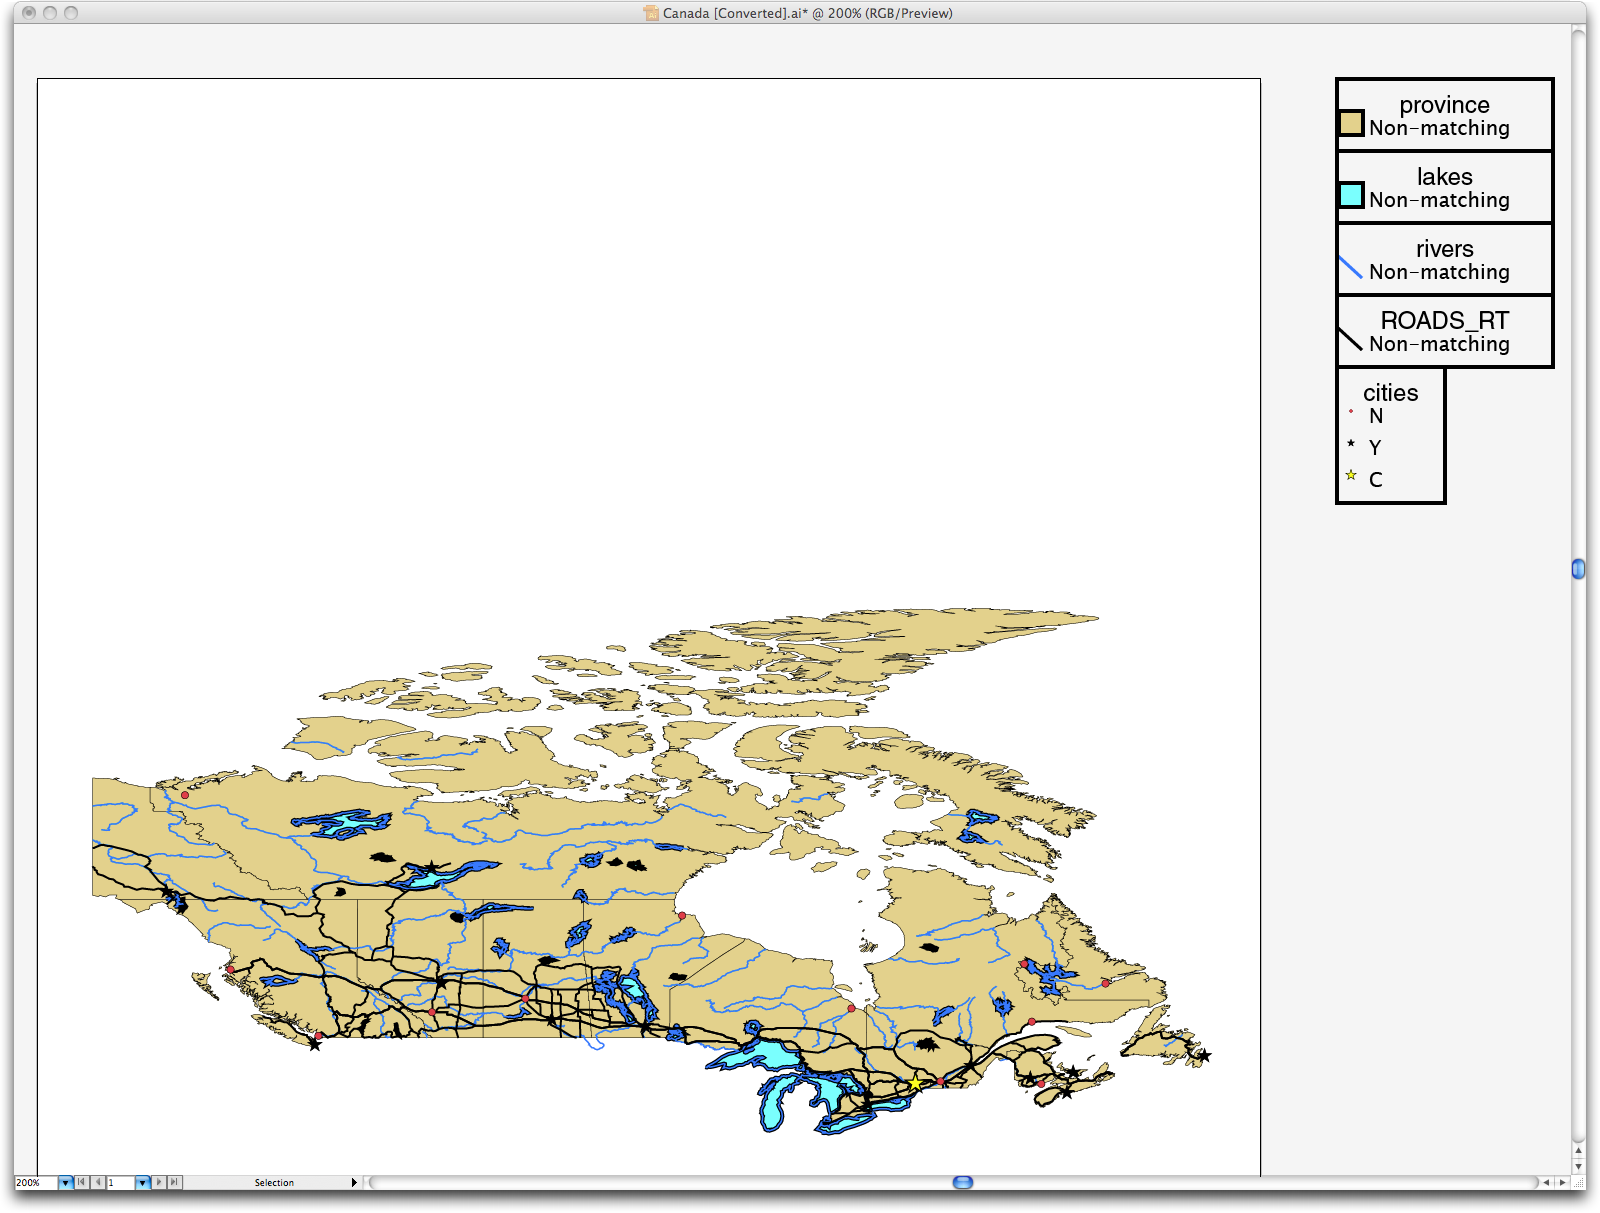 Cartographica map exported and opened with Adobe Illustrator